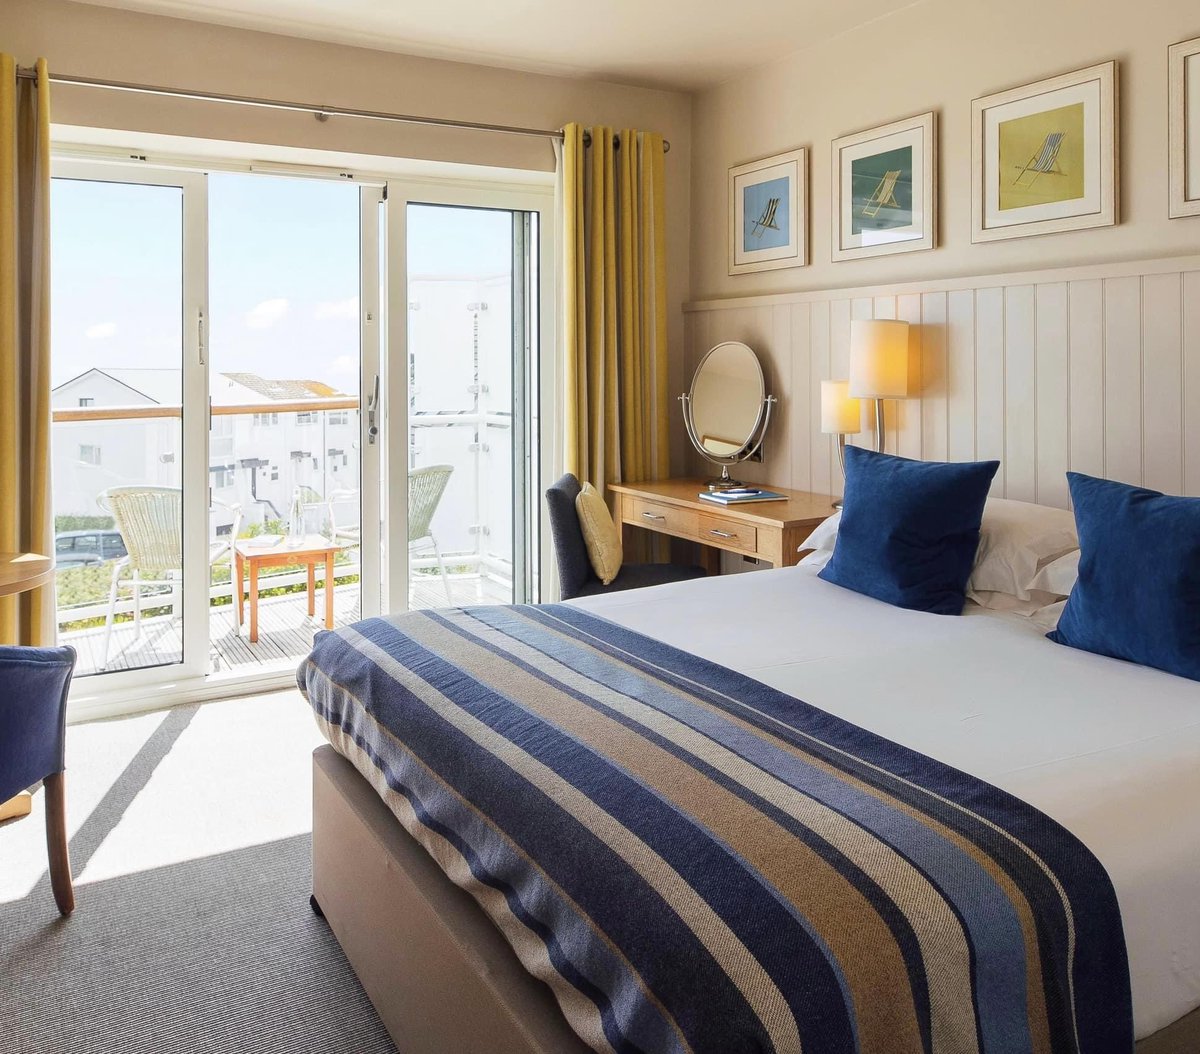 Enjoy an escape to Saundersfoot this Spring and experience our beautiful coastal setting.

Our individually styled rooms provide the perfect base for some much needed rest and relaxation after a long day of exploring. 

#stbridesspahotel #saundersfoot